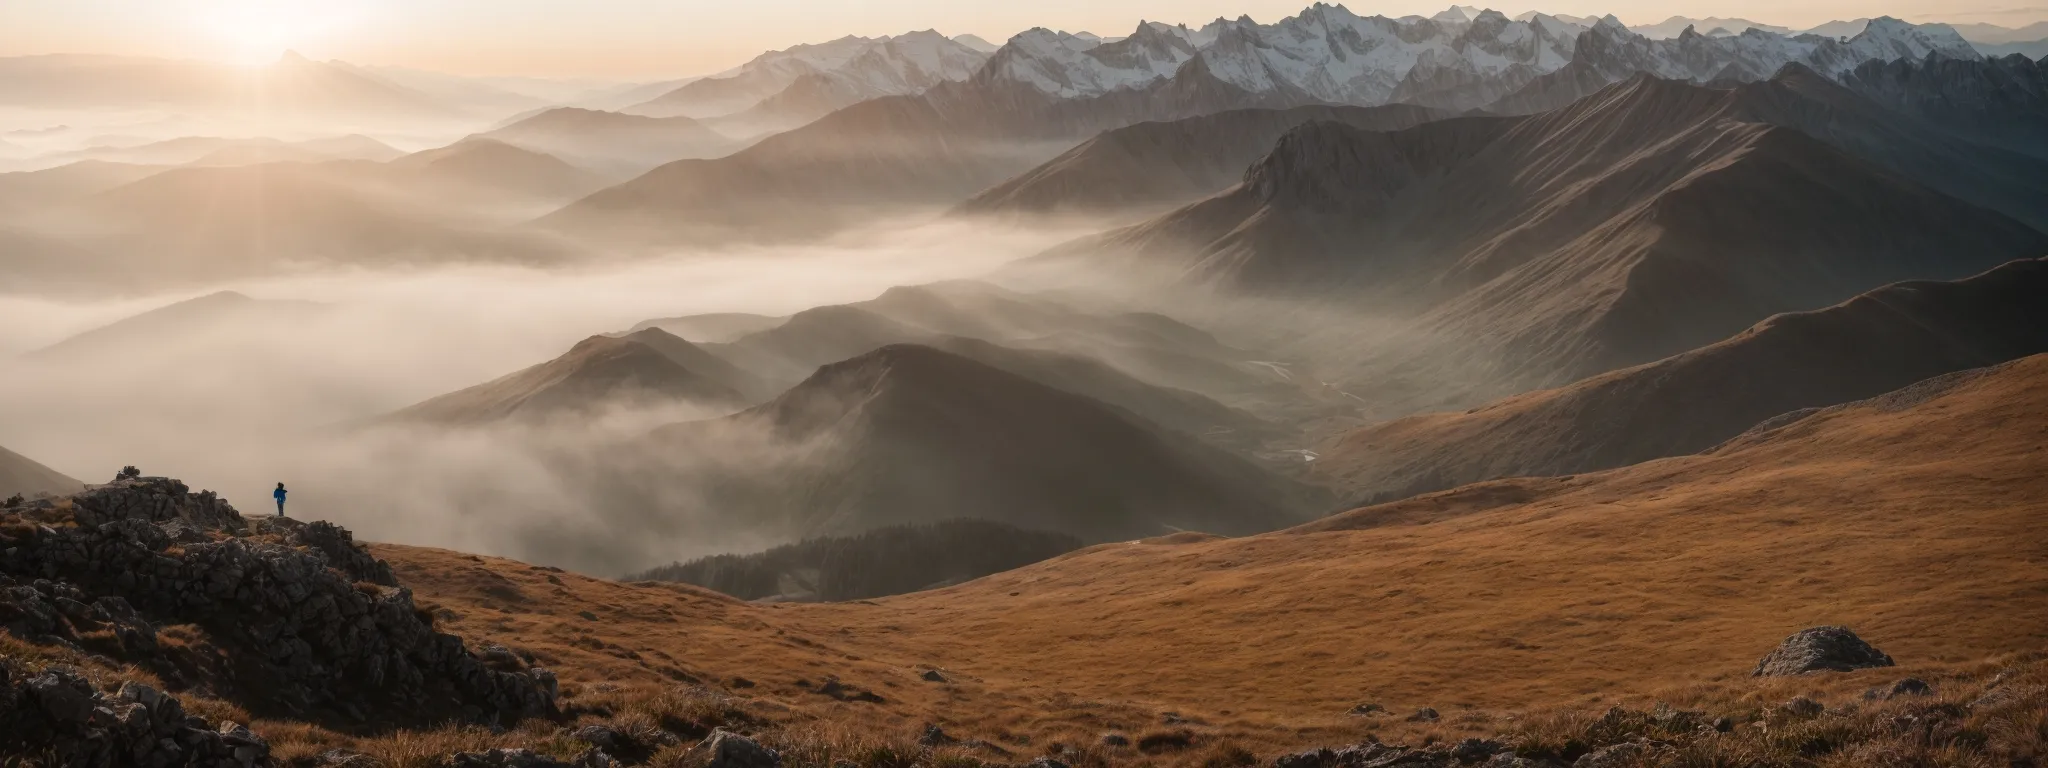 a panoramic view of a mountaineer on a peak overlooking a vast, unexplored landscape bathed in the soft glow of dawn.